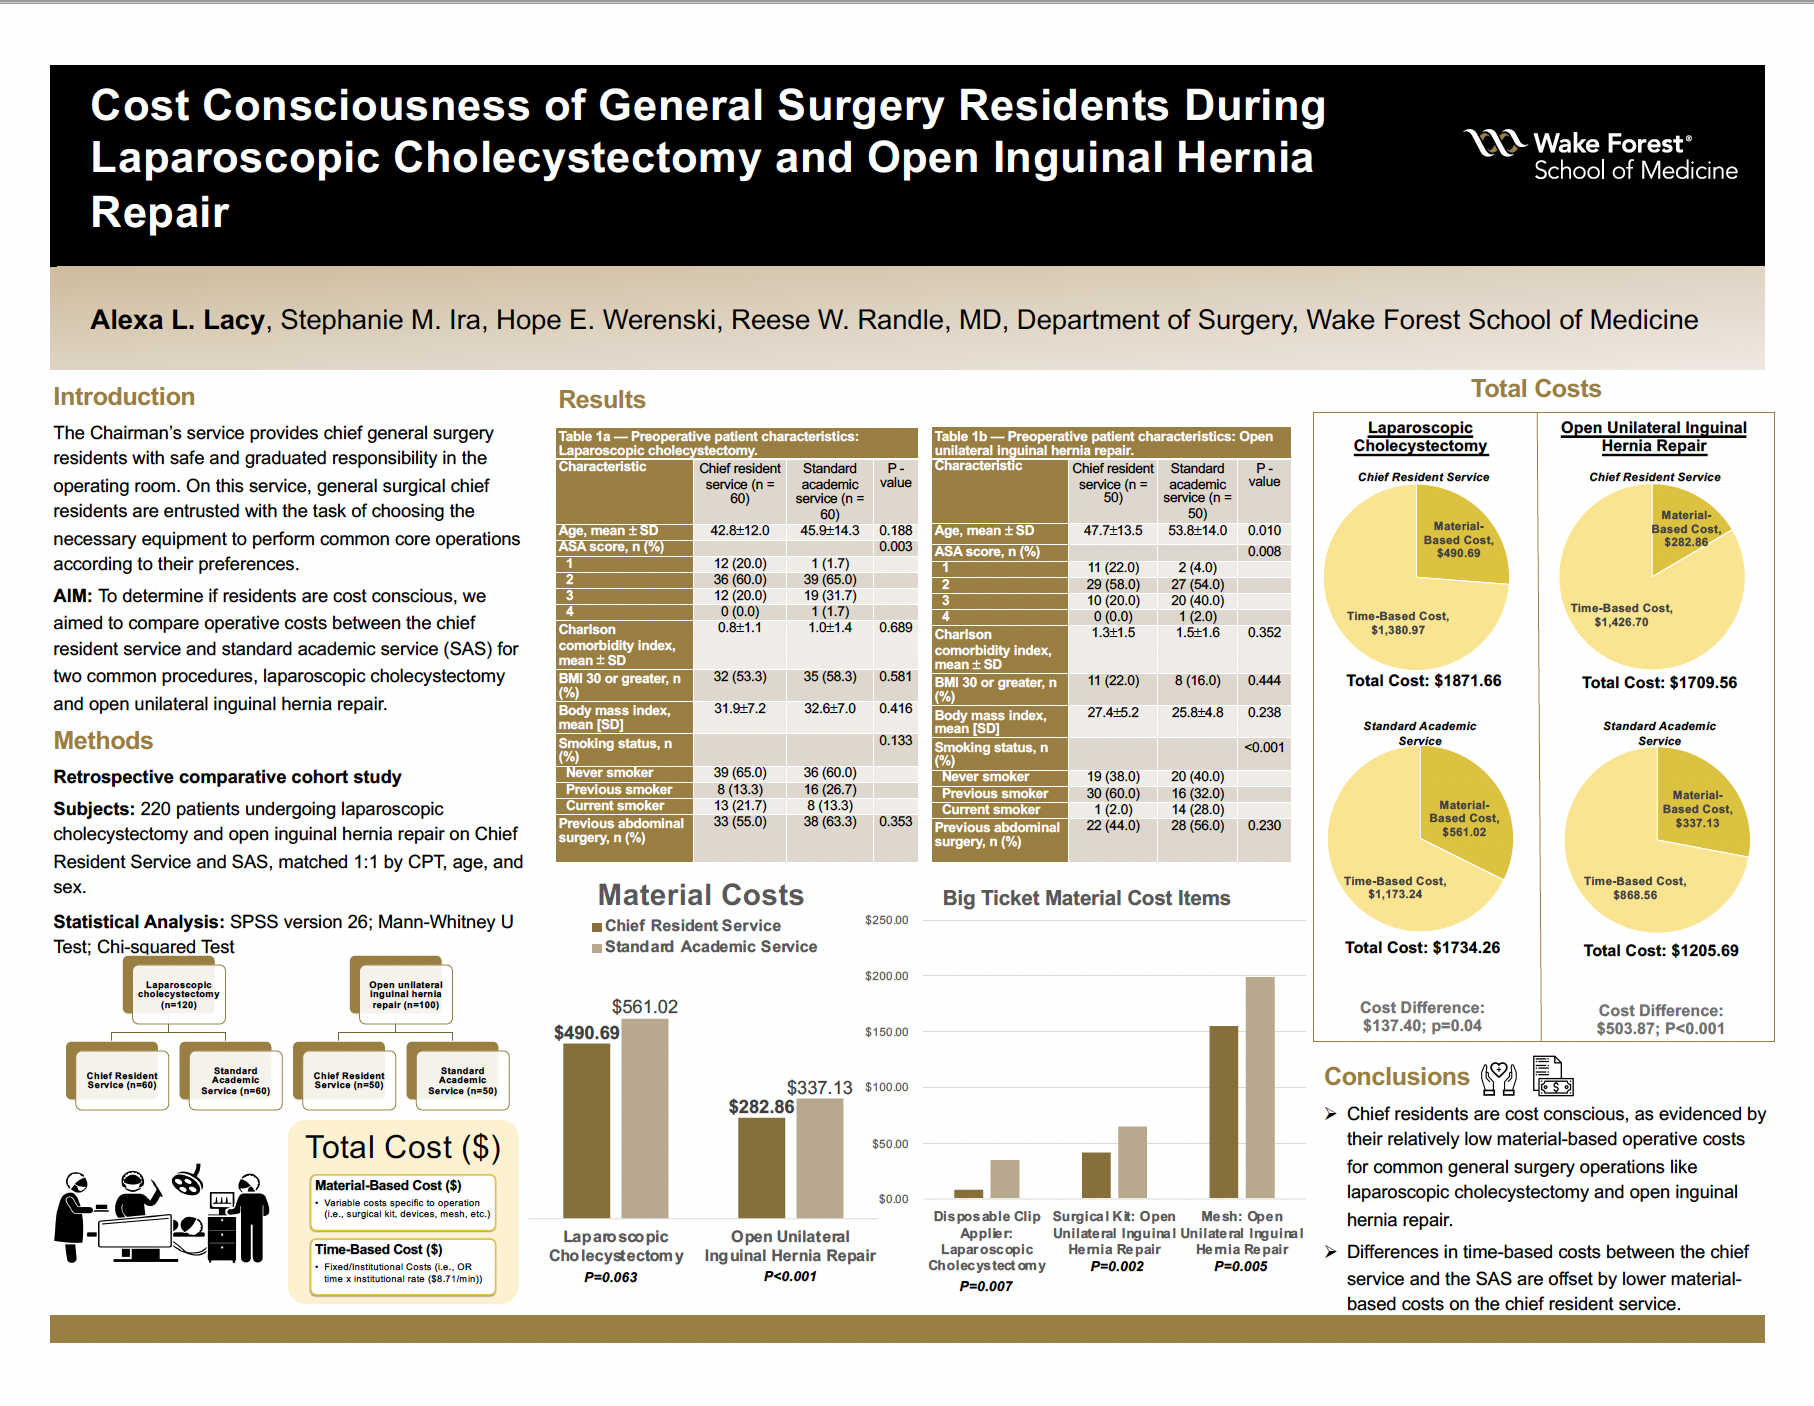 Showcase Image for Cost Consciousness of General Surgery Residents During Laparoscopic Cholecystectomy and Open Inguinal Hernia Repair